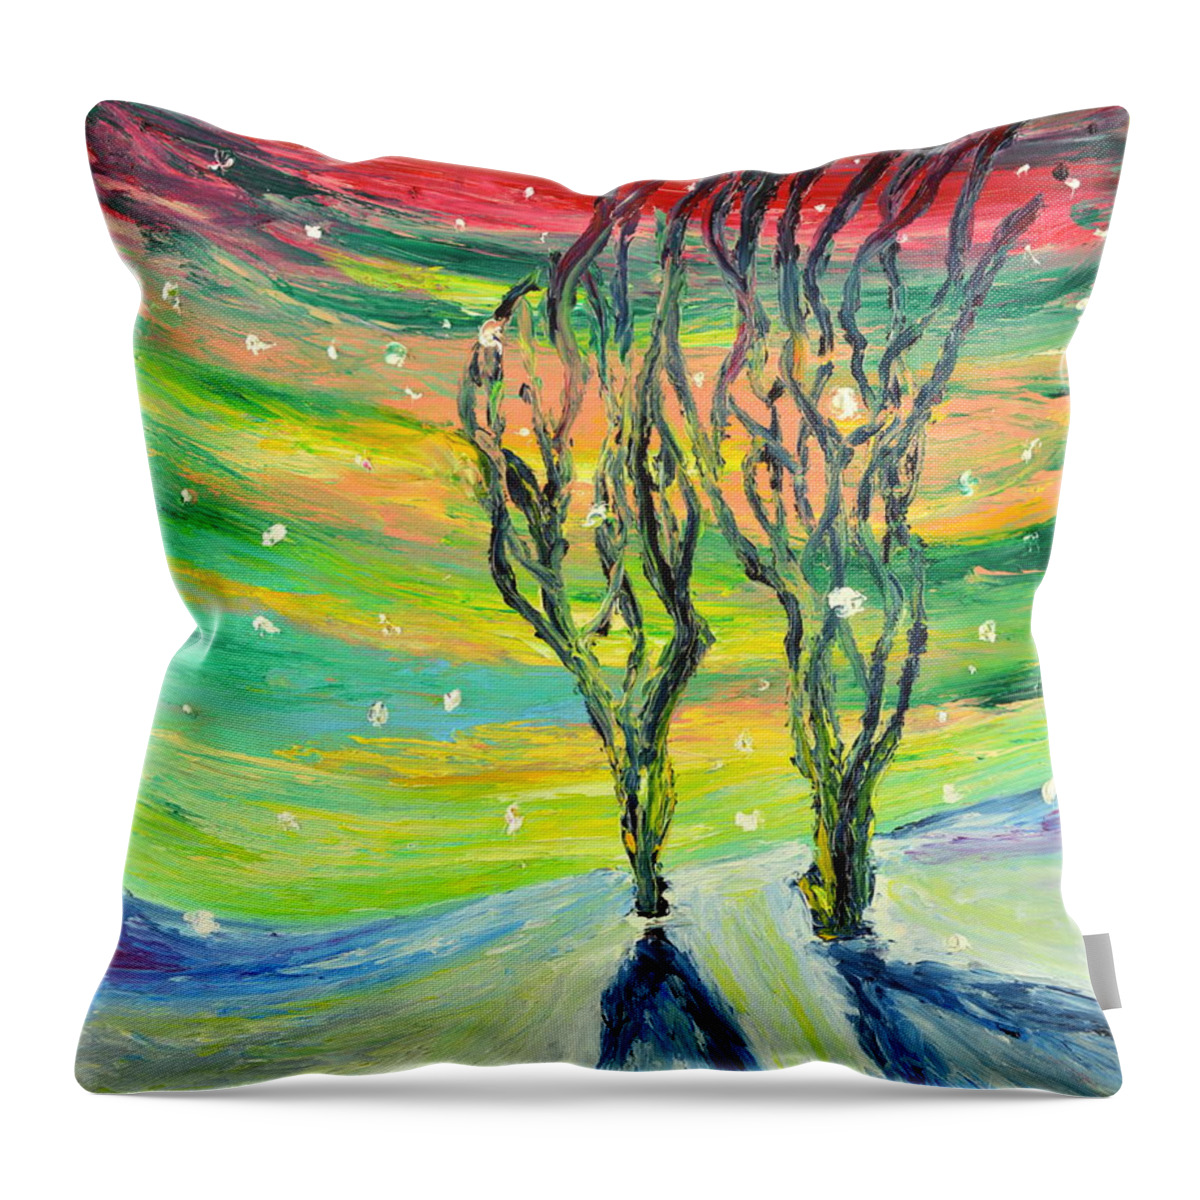 Snow Throw Pillow featuring the painting Lemonade by Chiara Magni